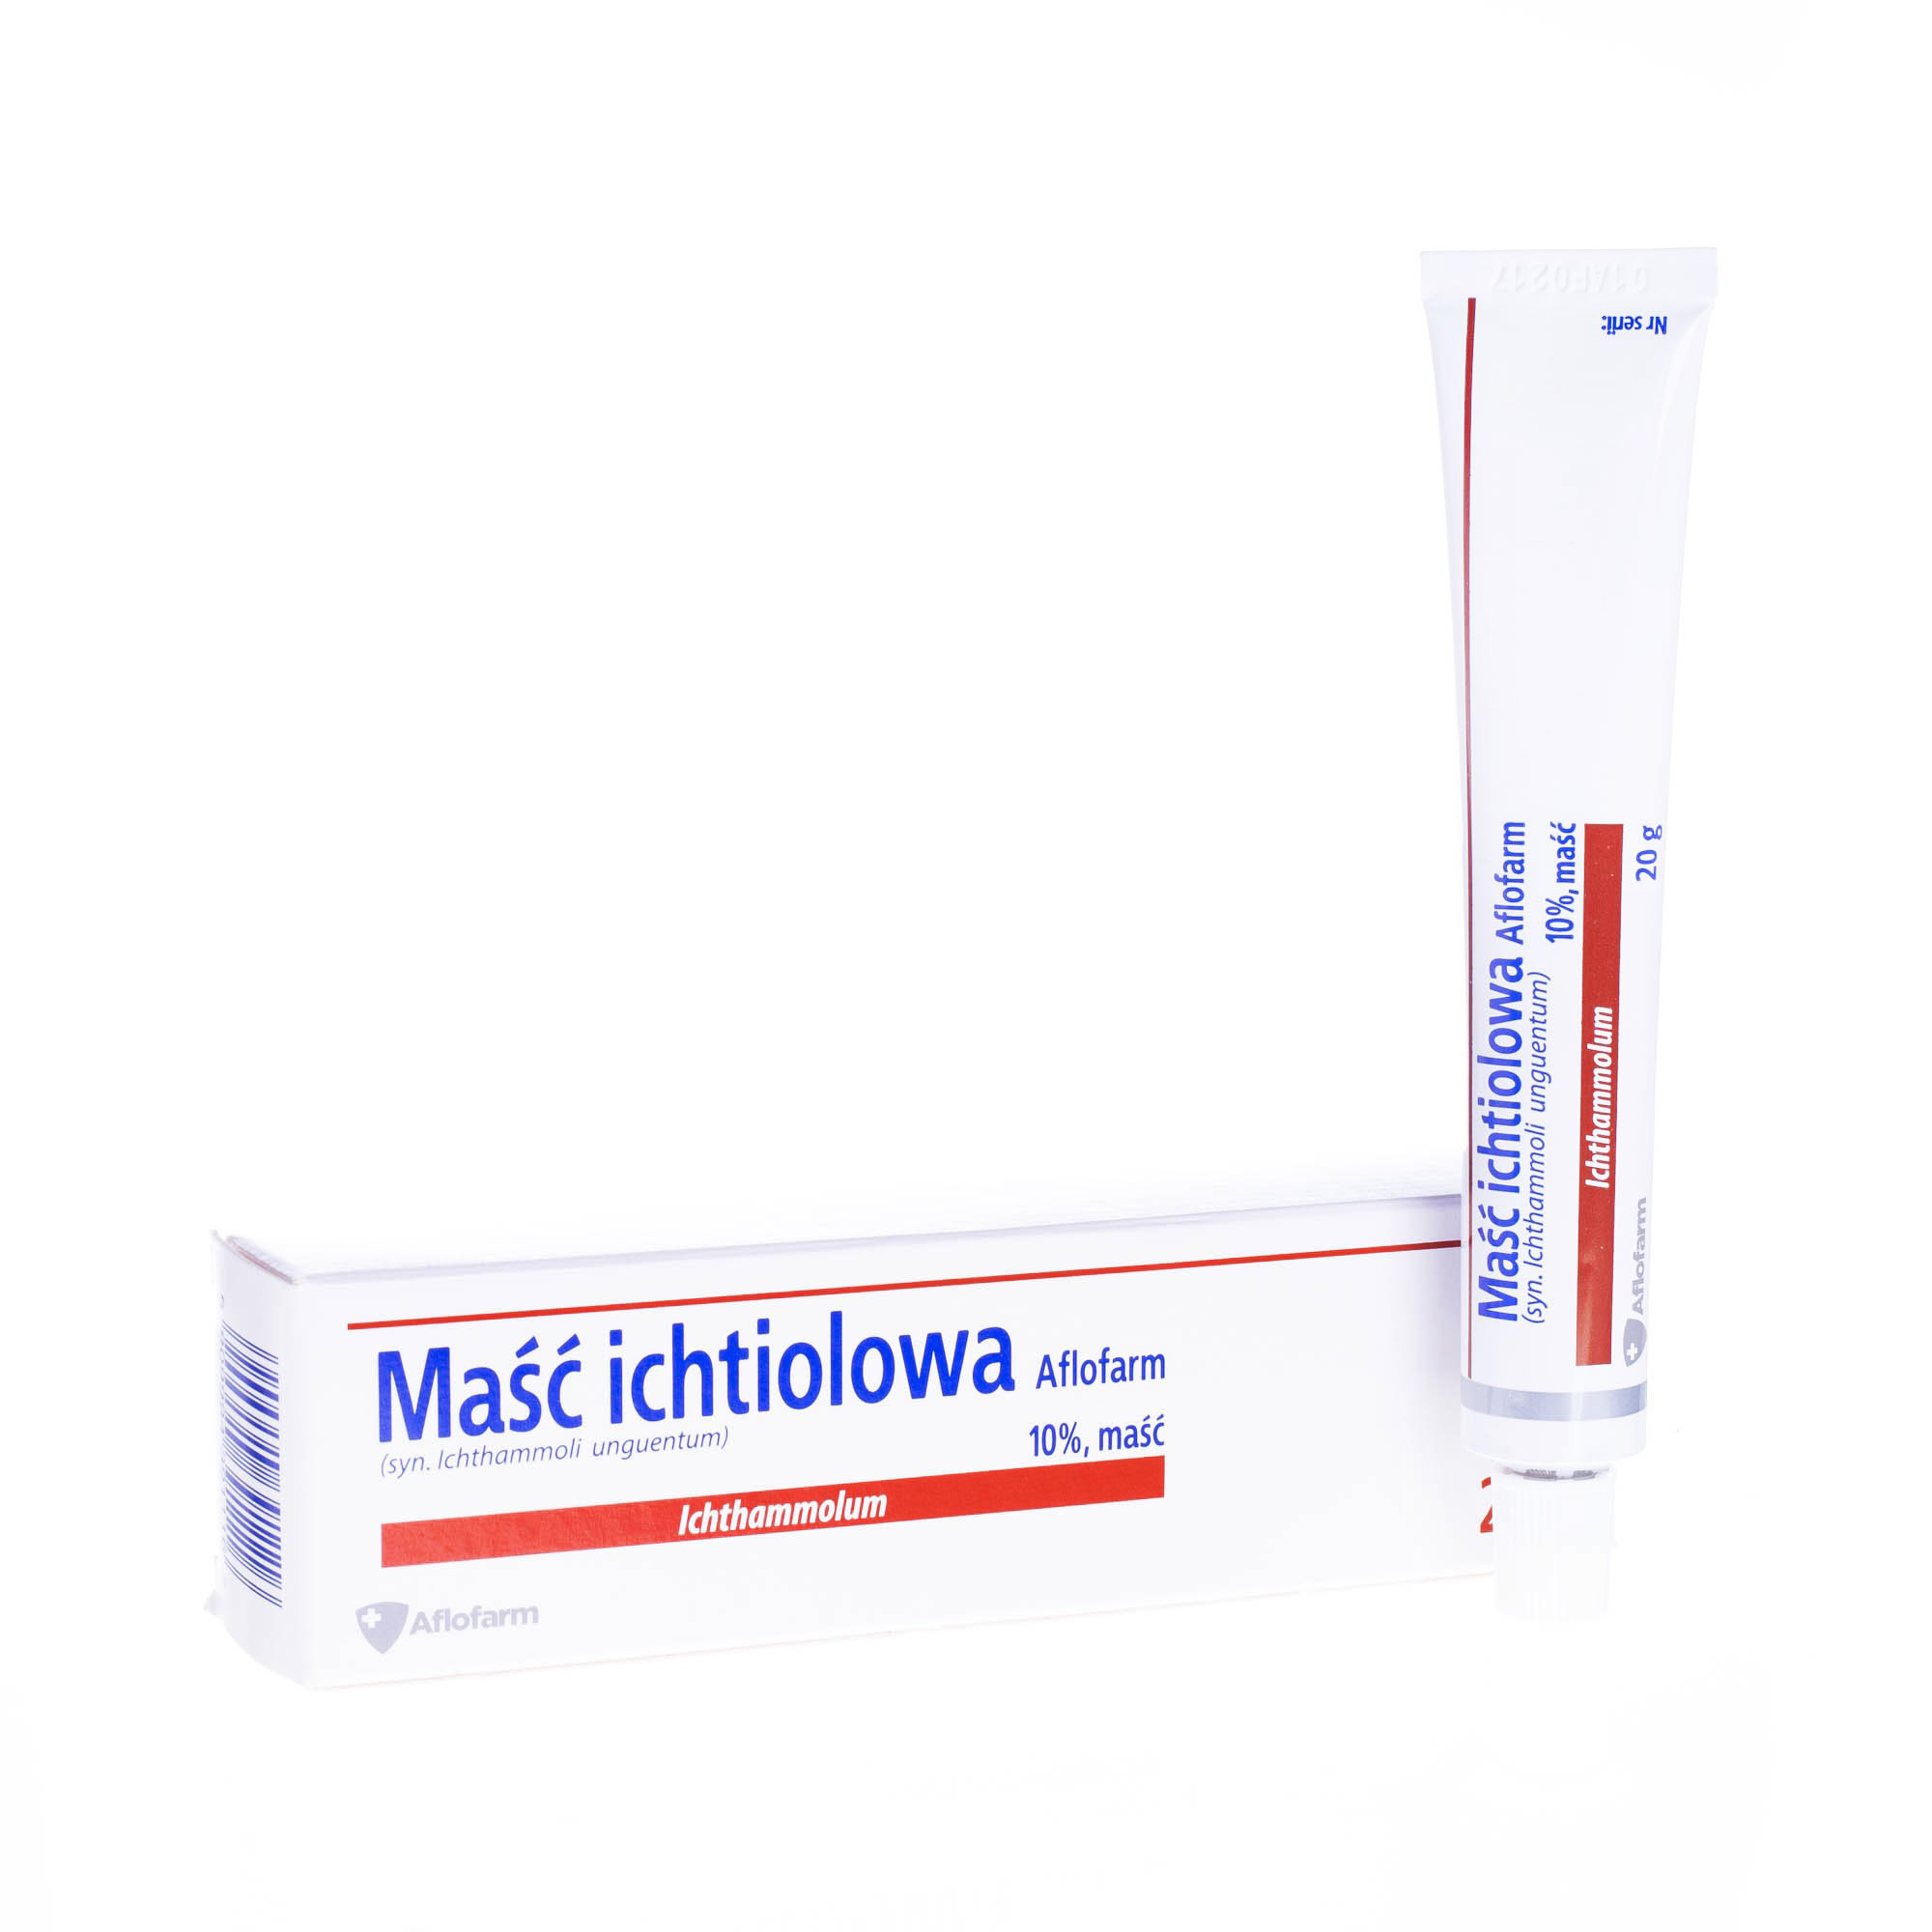 "Packaging and tube of Maść ichtiolowa from Aflofarm, containing 10% ichthammol. The packaging is predominantly white with blue and red accents. It displays the product name prominently along with the brand name Aflofarm and specifies the contents as 'Ichthammol 10%, ointment'. The tube is shown lying in front of the box, with a red stripe running vertically on the side, indicating the tube capacity of 20 grams.